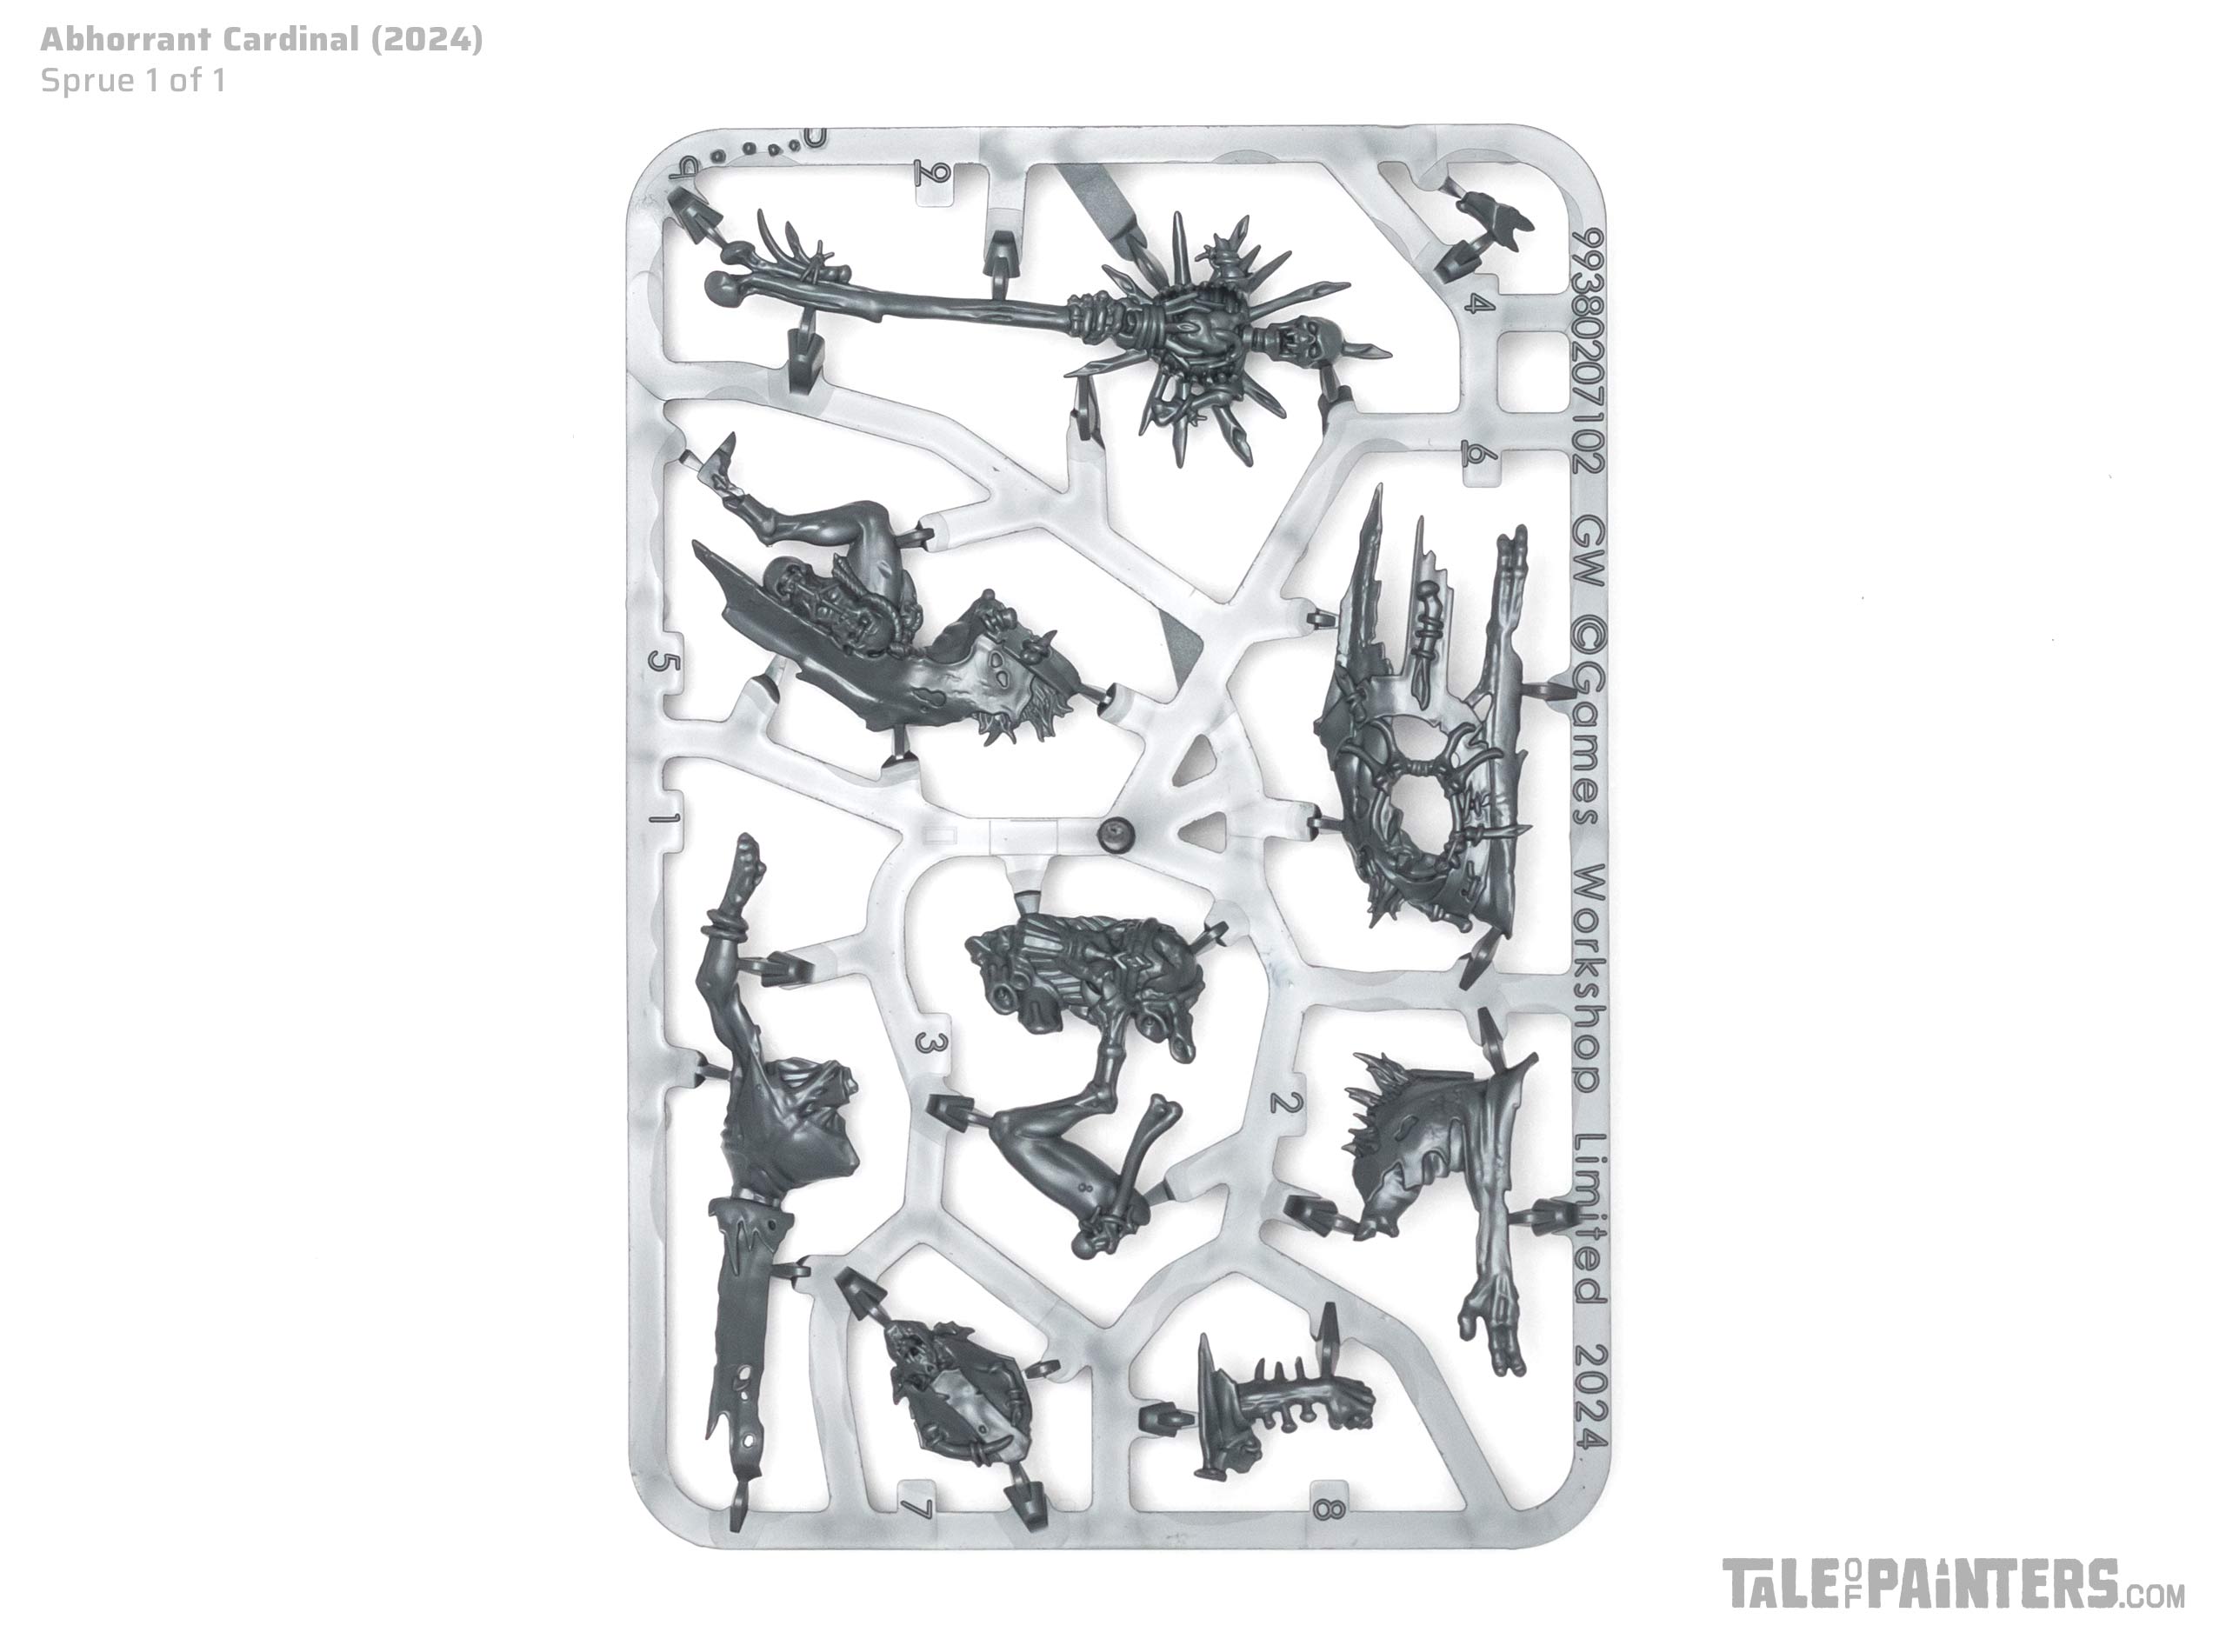 Flesh-eater Courts Abhorrant Cardinal sprue review